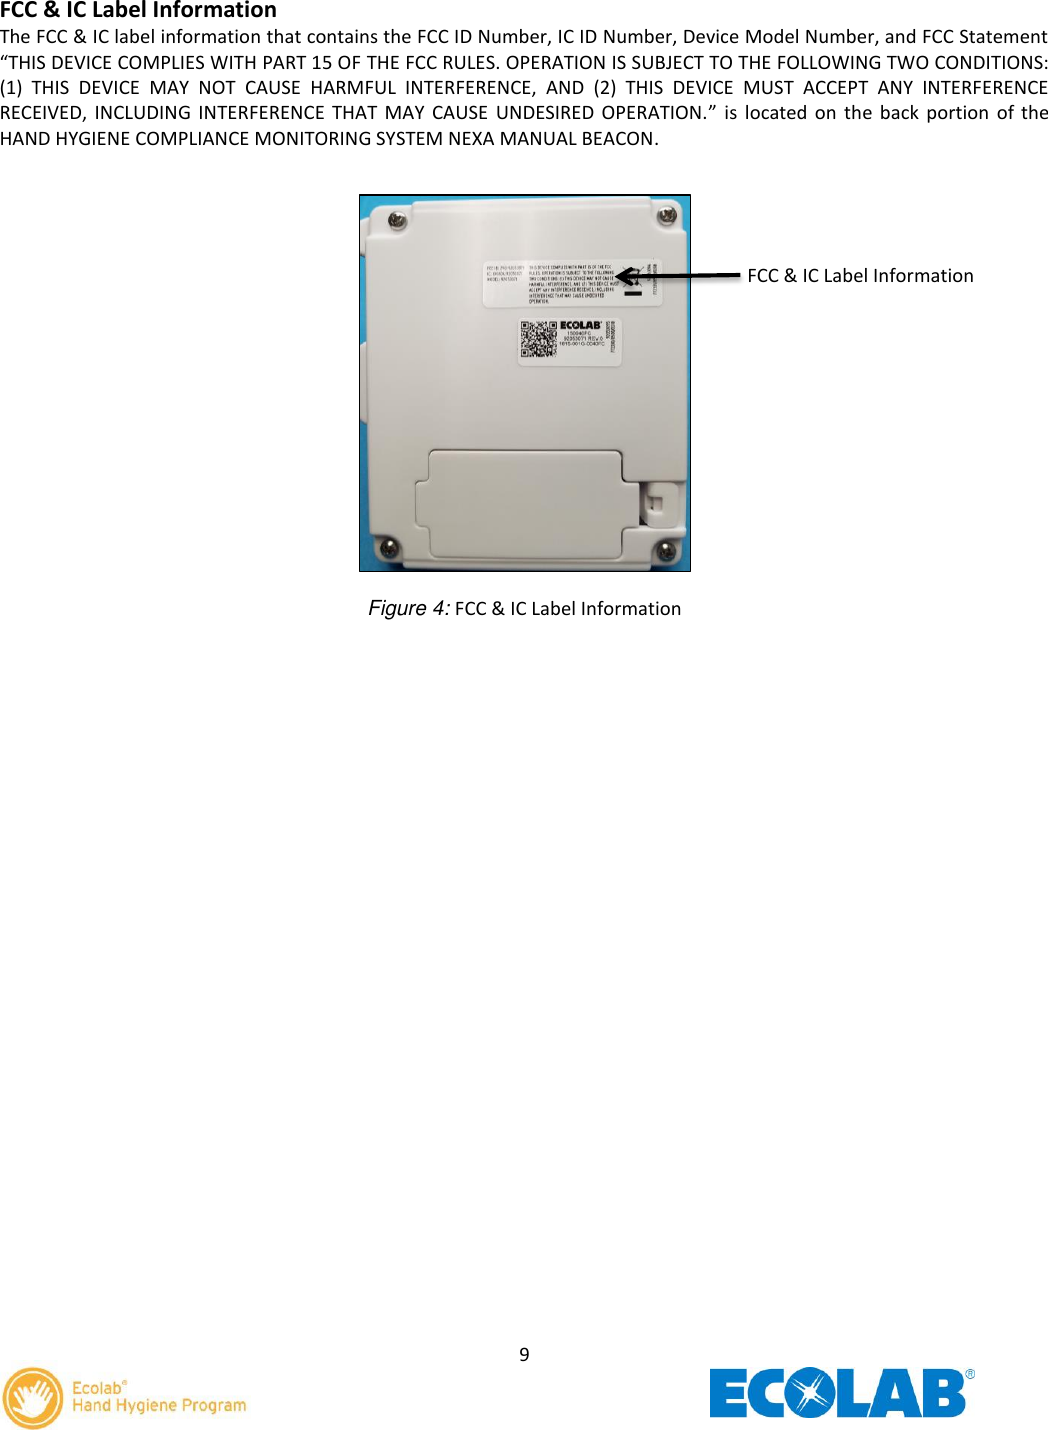 Page 10 of Ecolab 92053071 Hand Hygiene Compliance Monitoring Beacon User Manual Manual